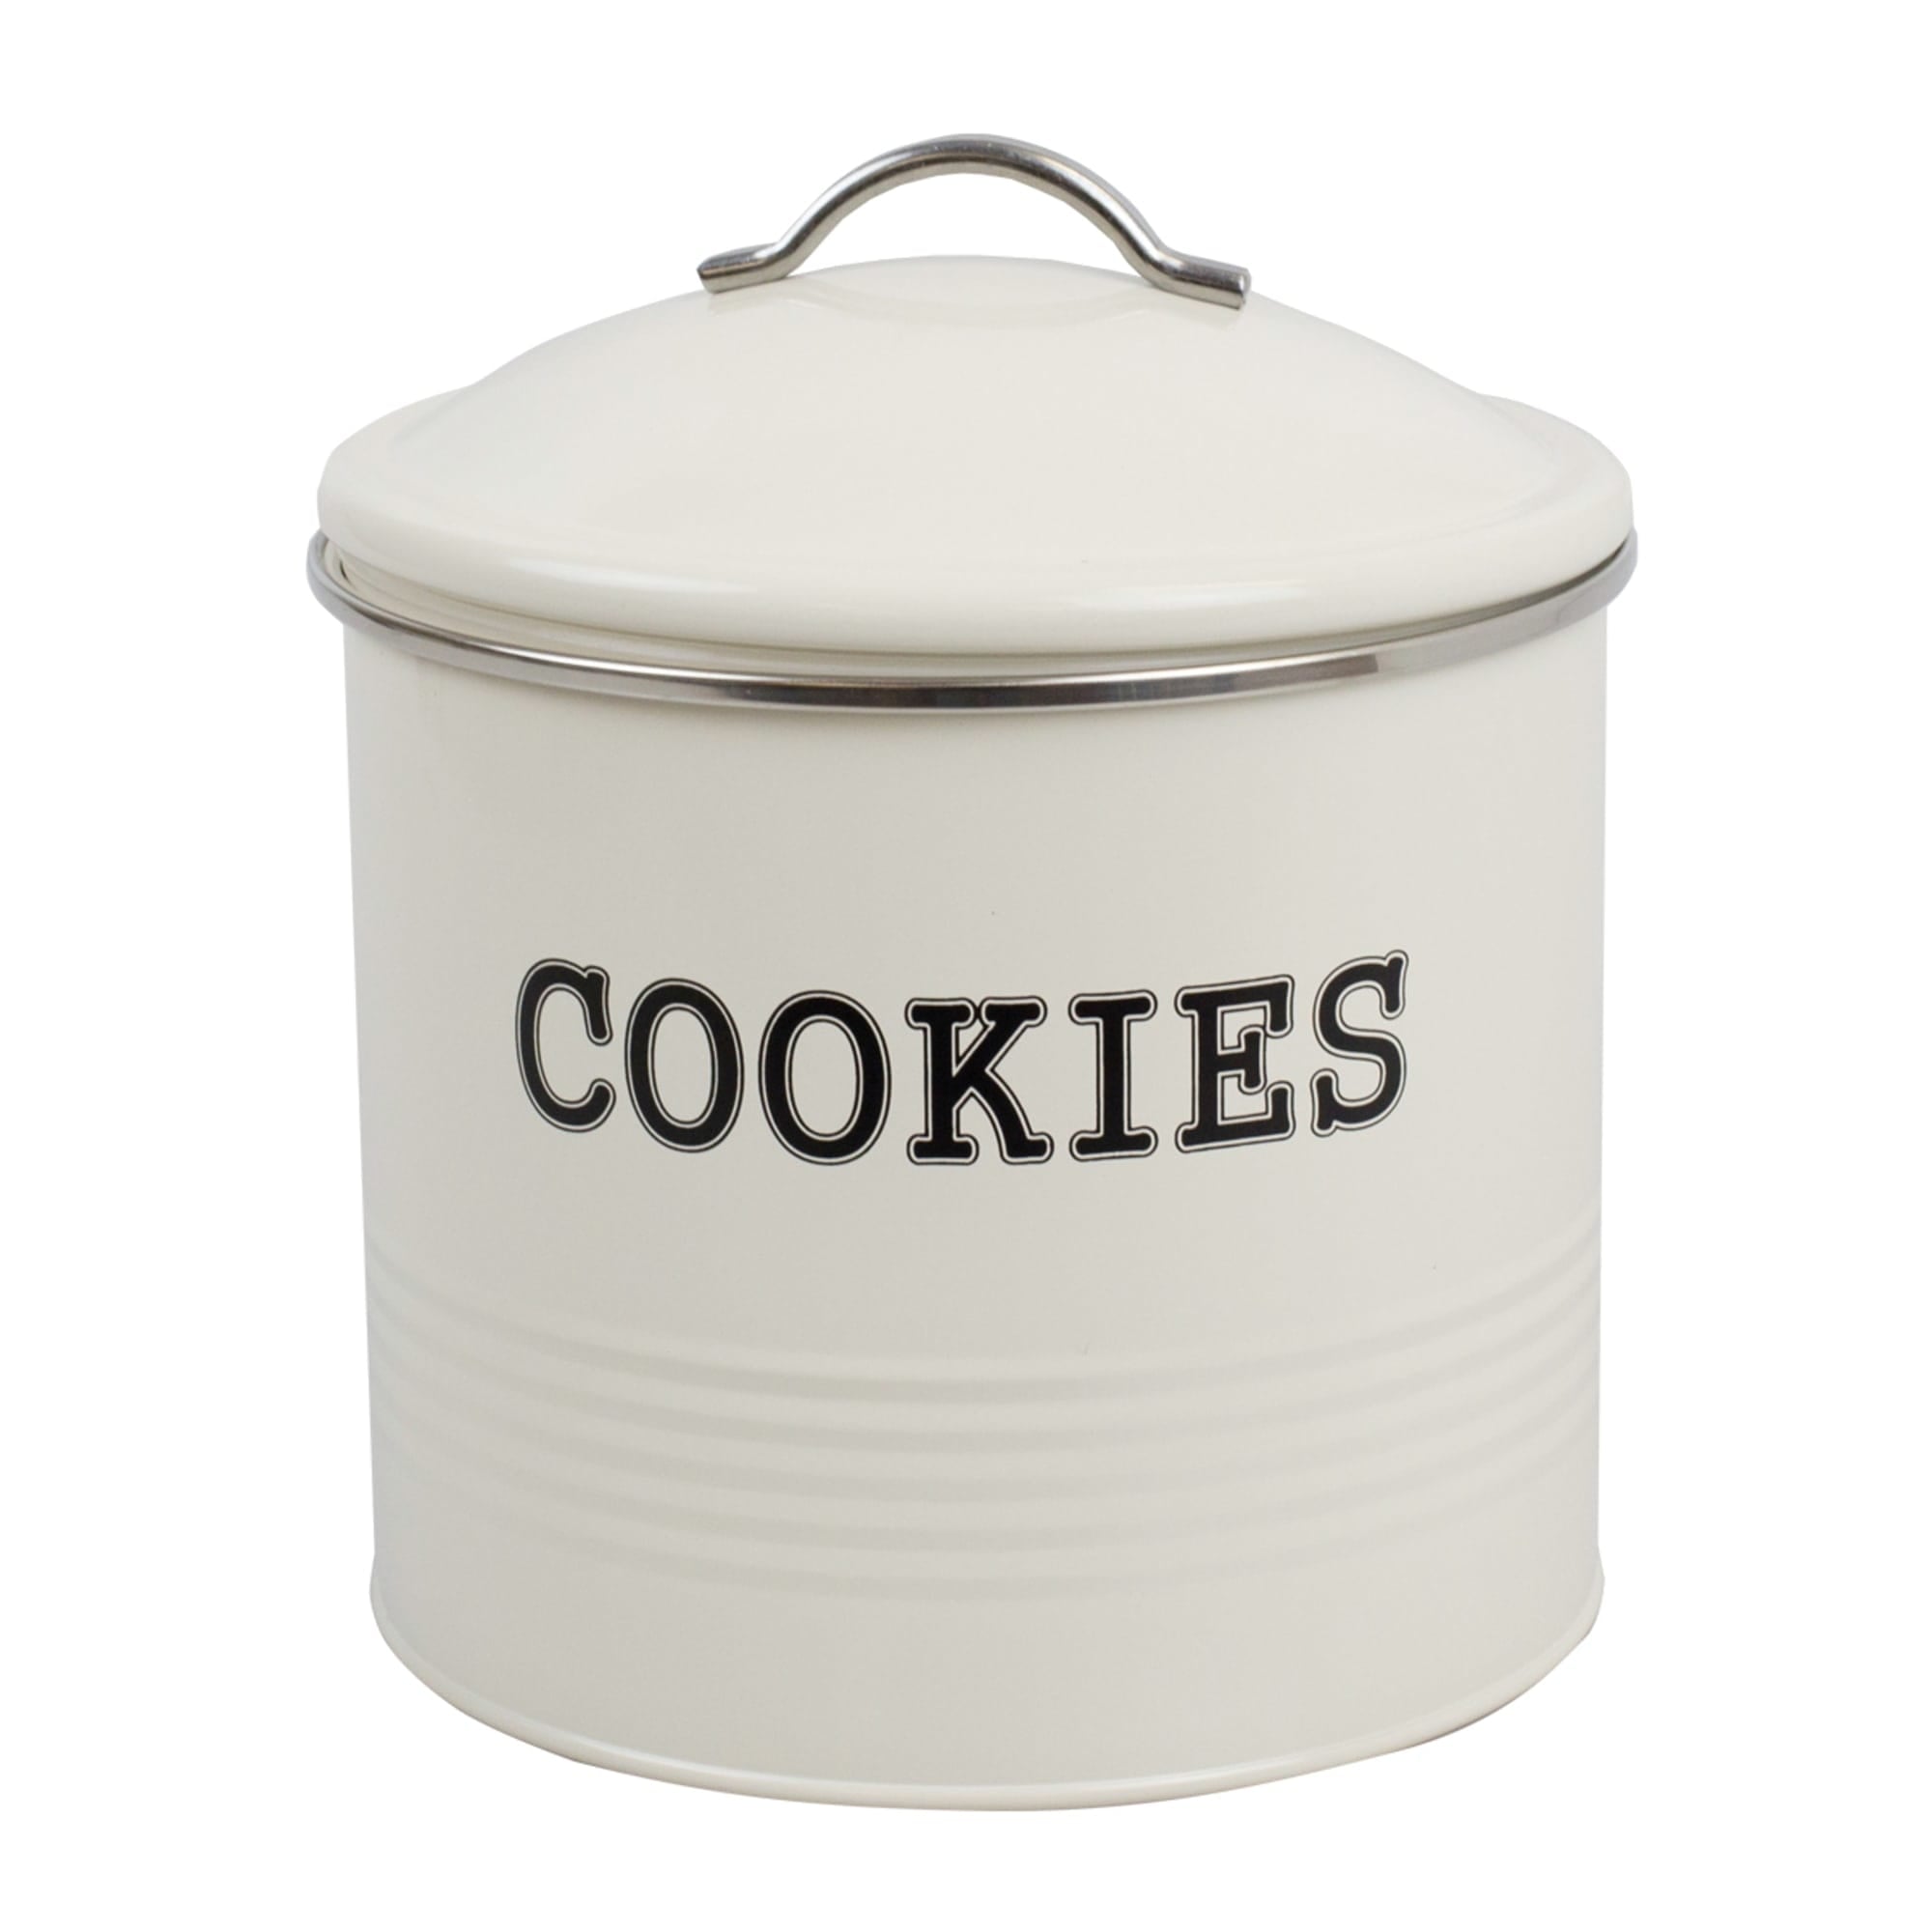 Home Basics Tin Cookie Jar, Ivory $8.00 EACH, CASE PACK OF 4